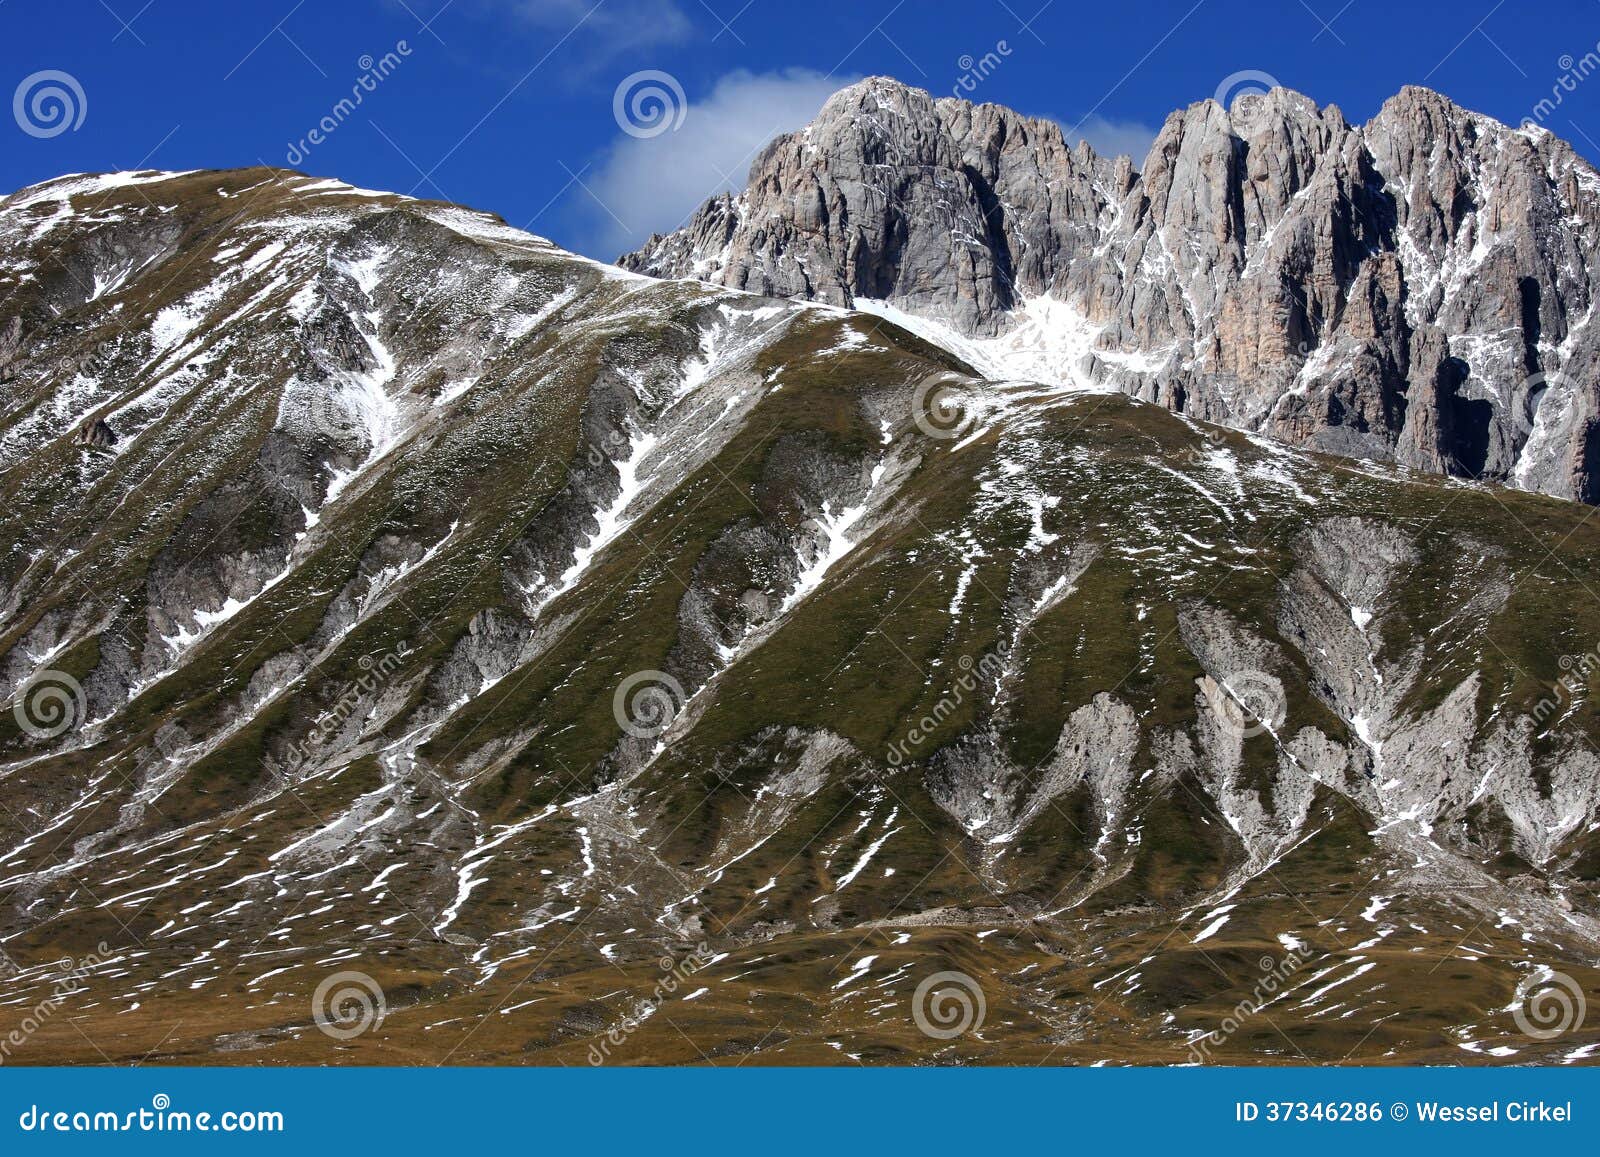 gran sasso mountain in the apennines of italy